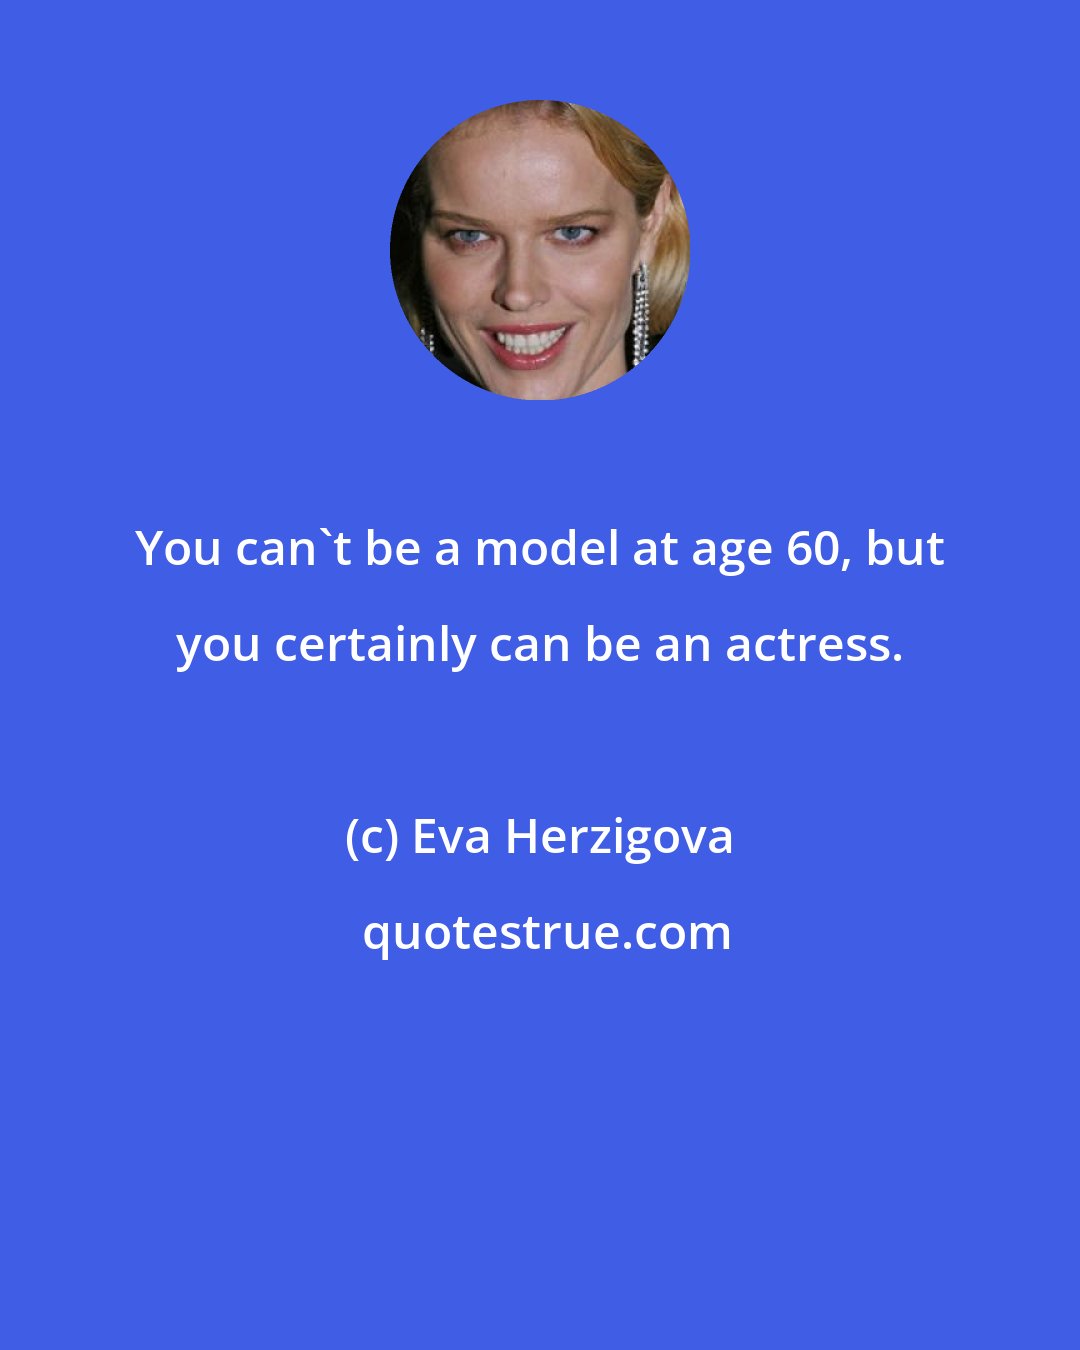 Eva Herzigova: You can't be a model at age 60, but you certainly can be an actress.